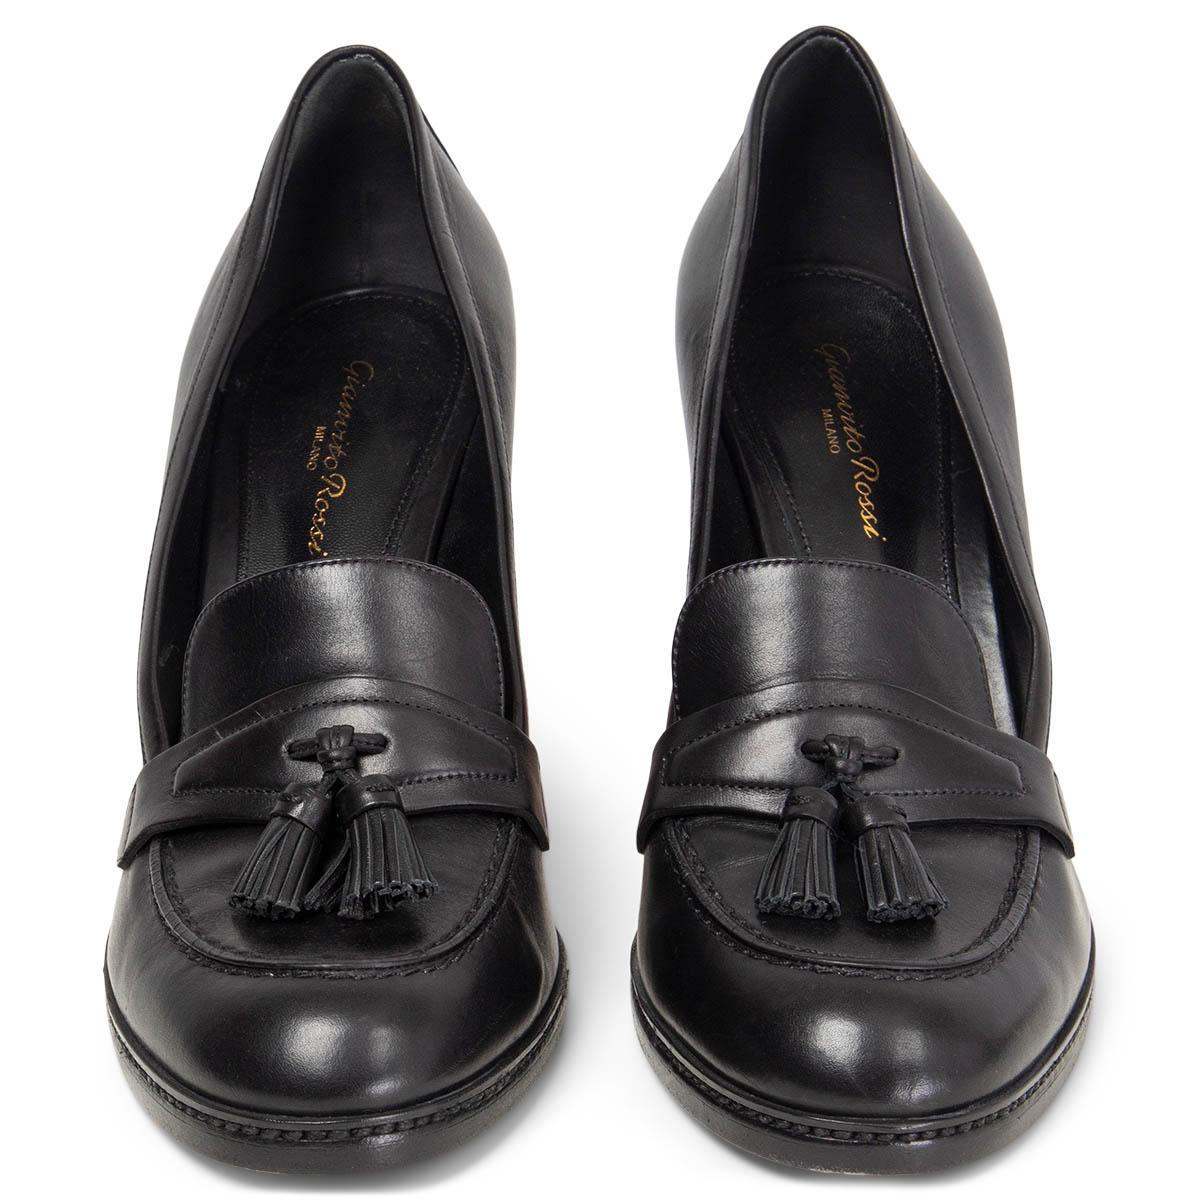 100% authentic Gianvito Rossi tassel loafer pumps in black leather and a stacked. Have been worn once inside and are in virtually new condition. Come with dust bag. 

Measurements
Imprinted Size	41
Shoe Size	41
Inside Sole	26.5cm (10.3in)
Width	8cm